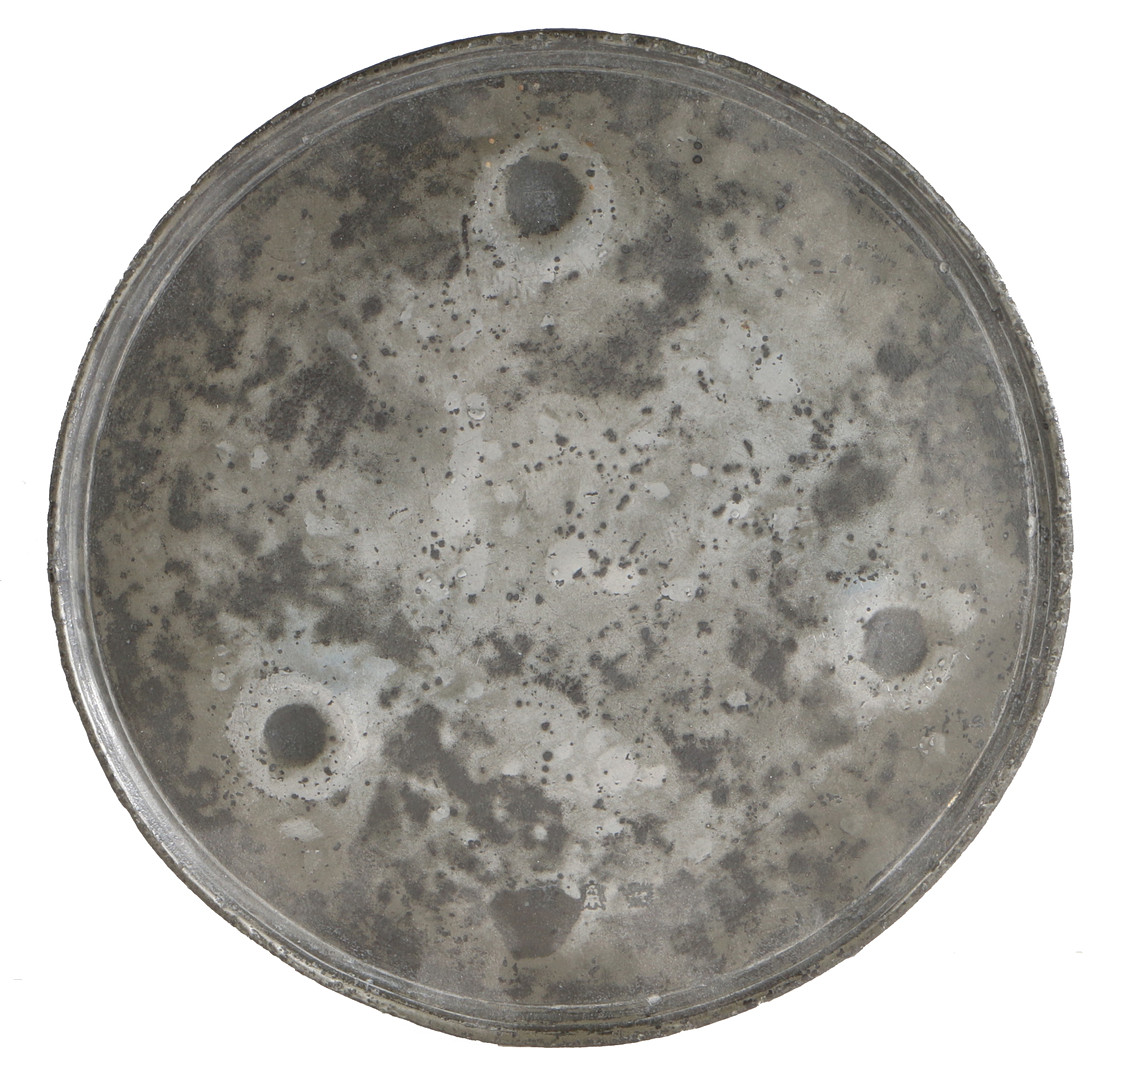 A RARE CHARLES II PEWTER FOOTED PLATE OR TAZZA, CIRCA 1660-80. - Image 2 of 4